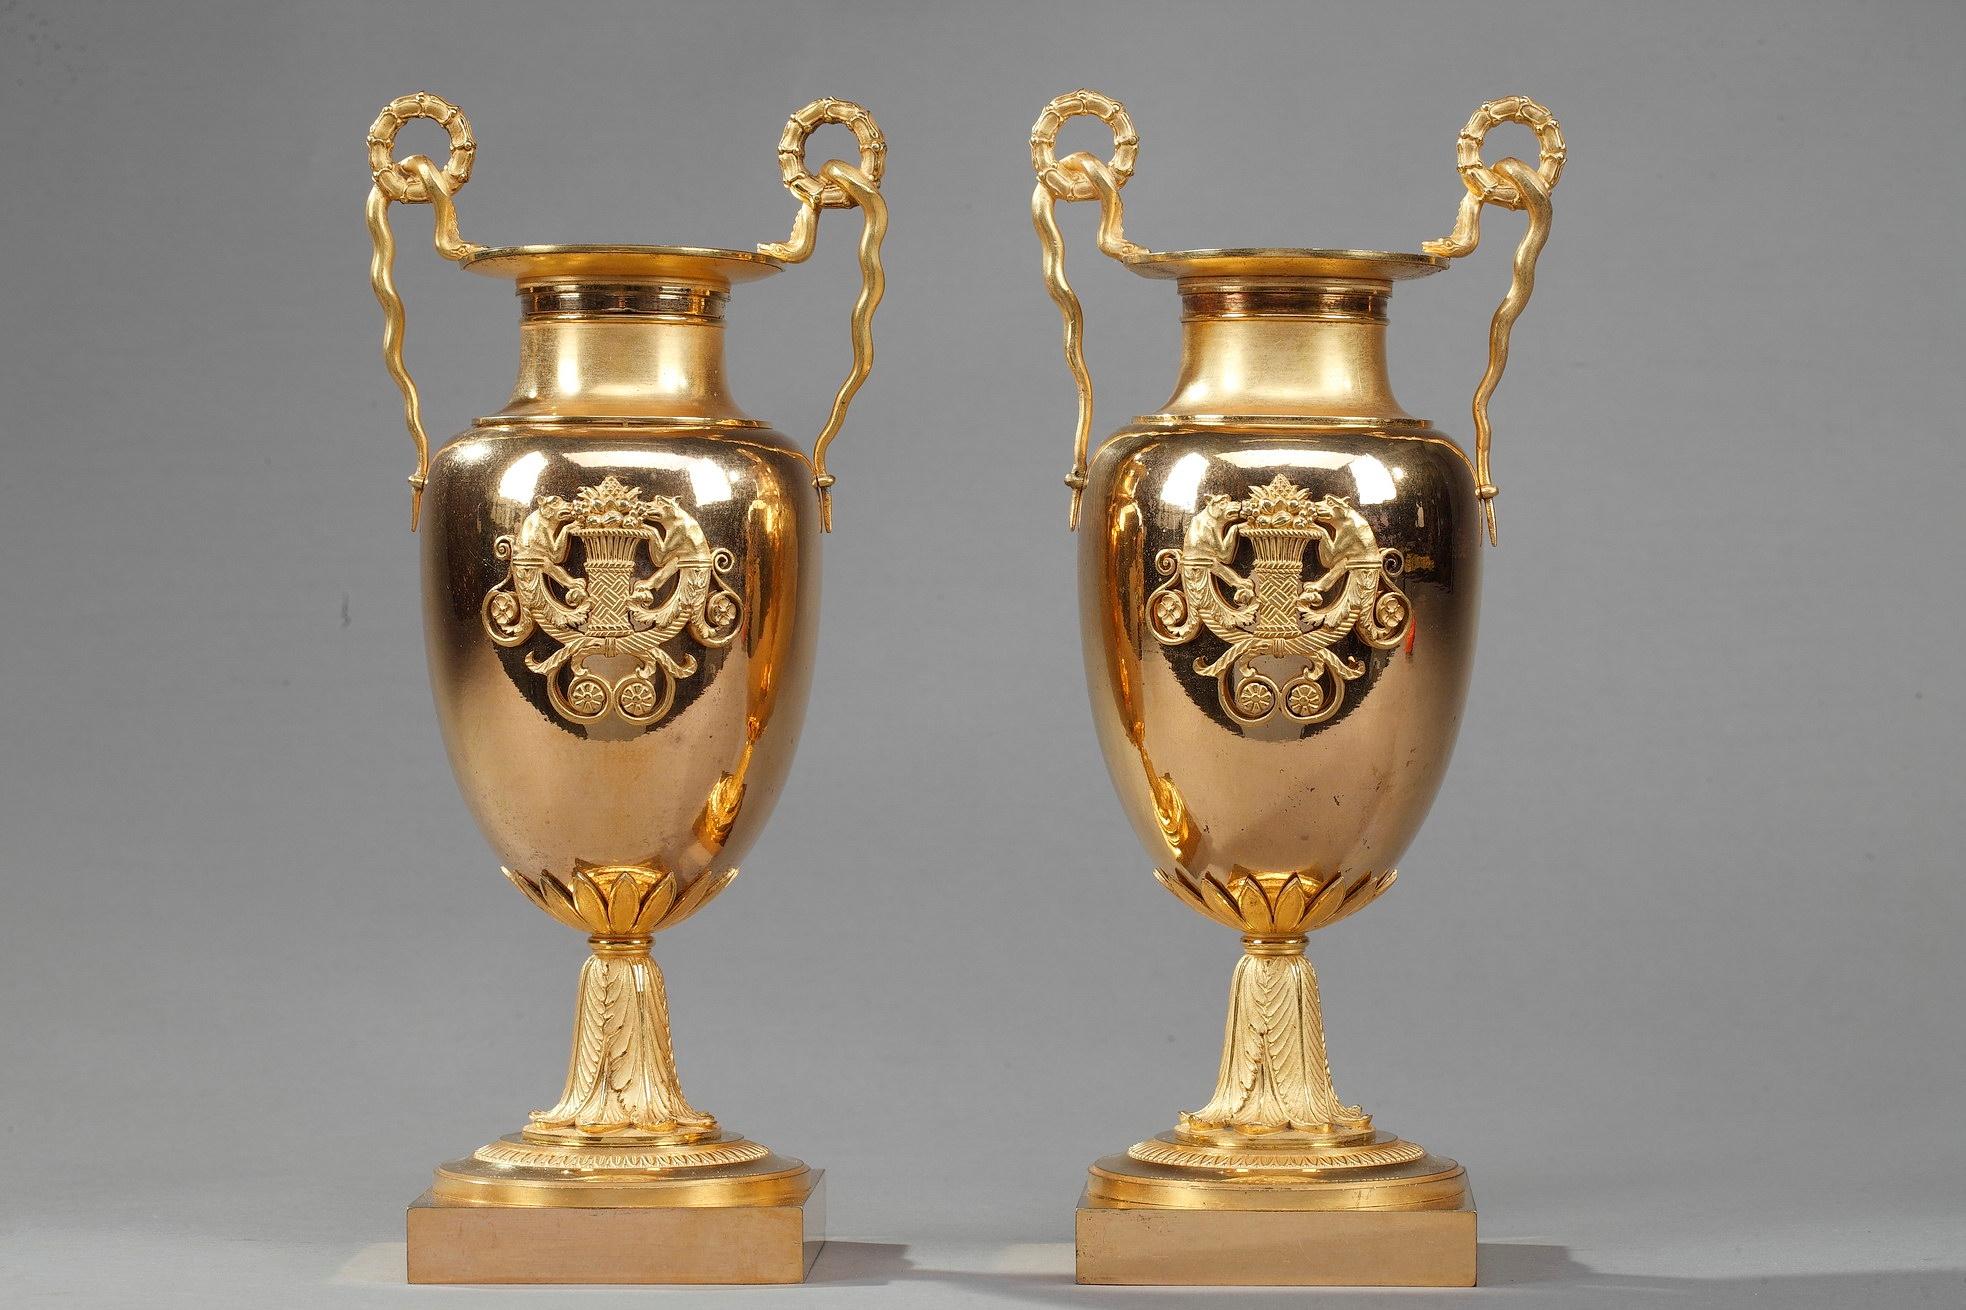 Pair of small krater centerpiece vases crafted entirely from ormolu bronze. A krater was a large vase in Ancient Greece, particularly used for watering down wine. These antique vases feature delicately snake-shaped handles. The paunch is beautifully